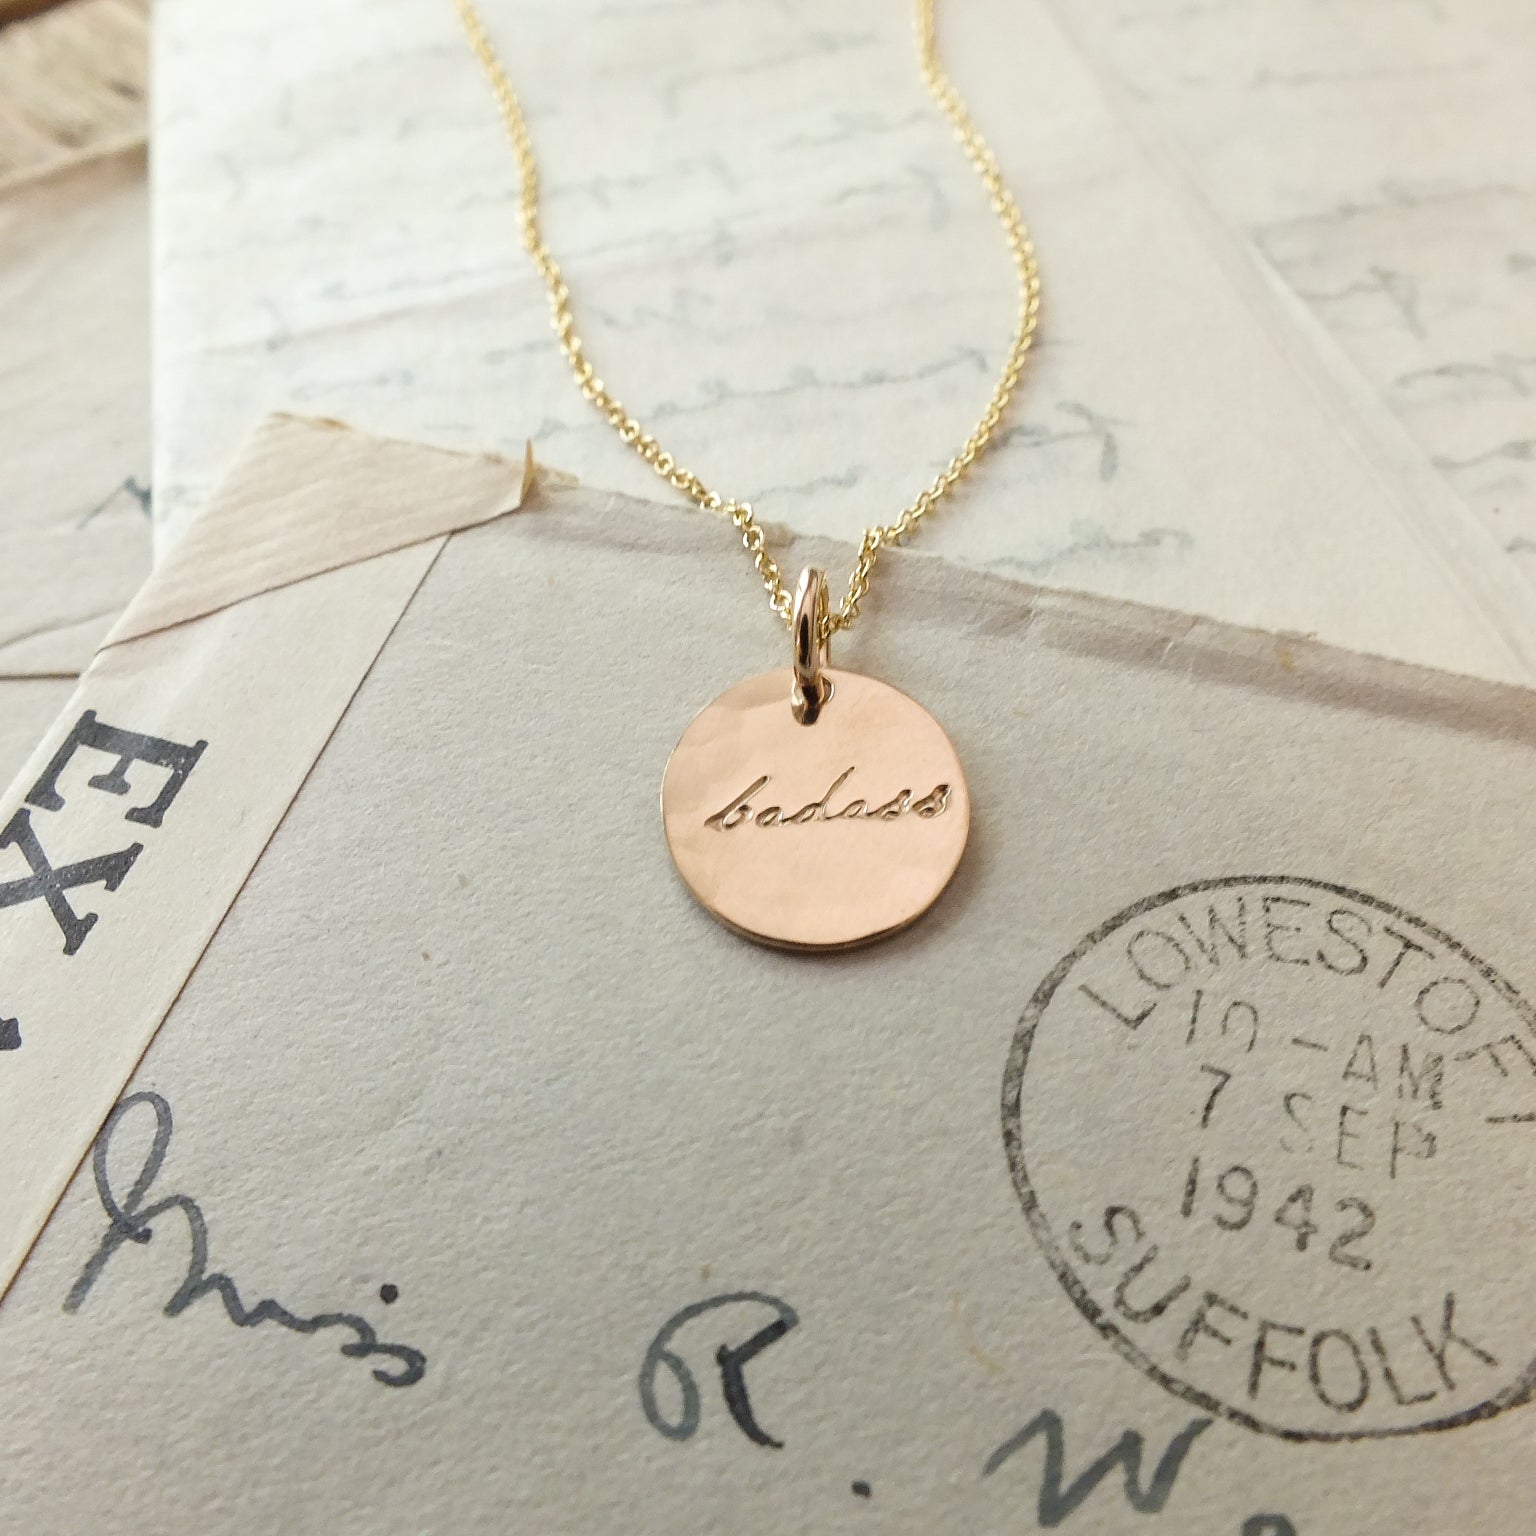 Badass Necklace with &quot;isabela&quot; inscription on a backdrop of vintage letters by Becoming Jewelry.